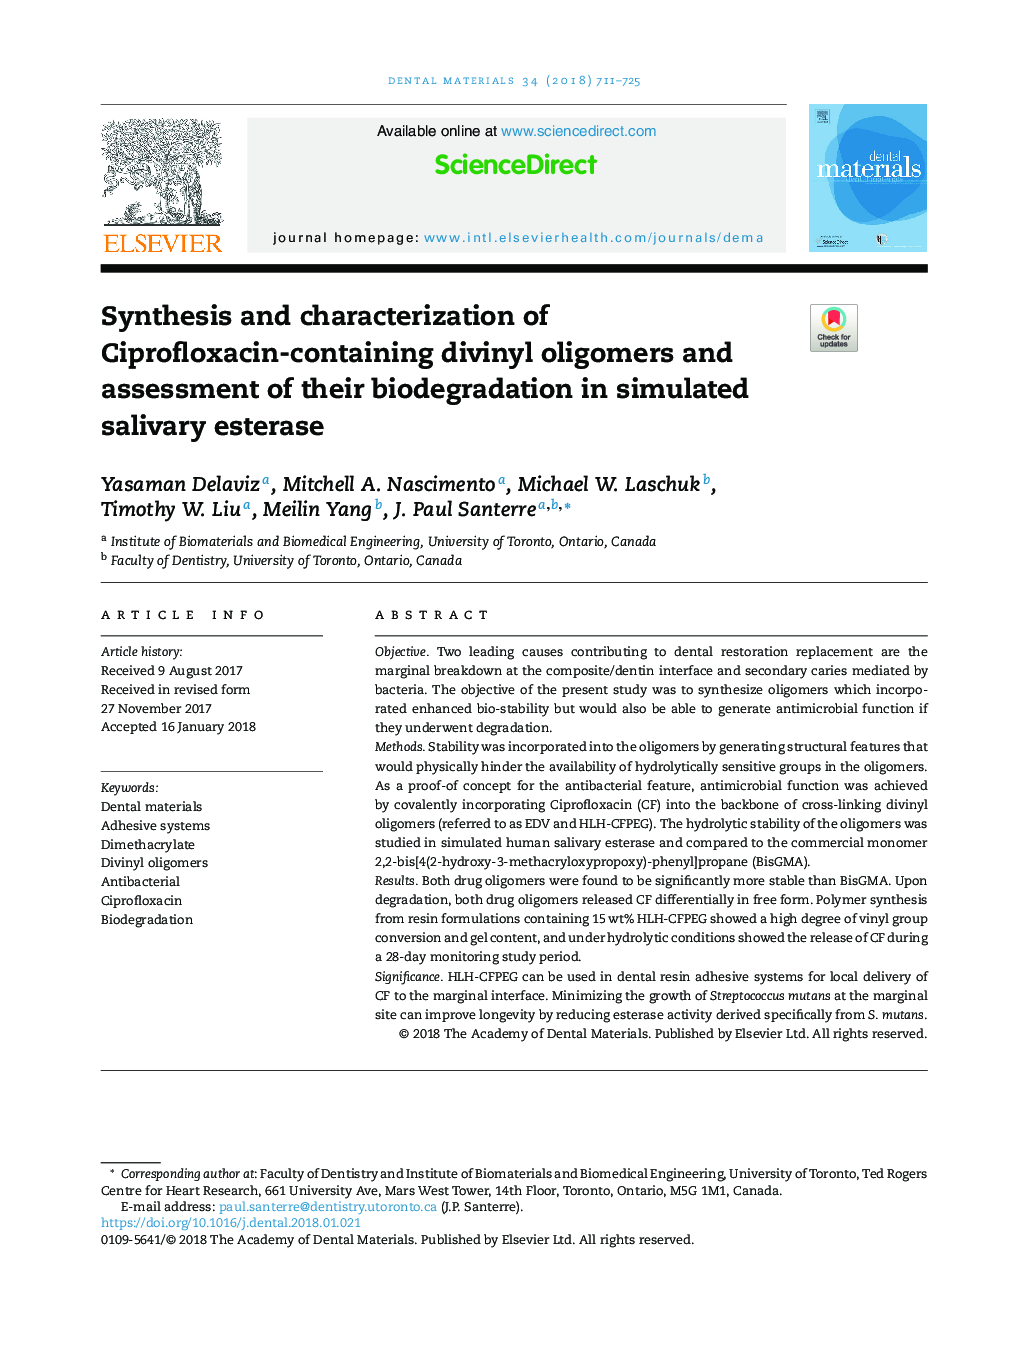 Synthesis and characterization of Ciprofloxacin-containing divinyl oligomers and assessment of their biodegradation in simulated salivary esterase